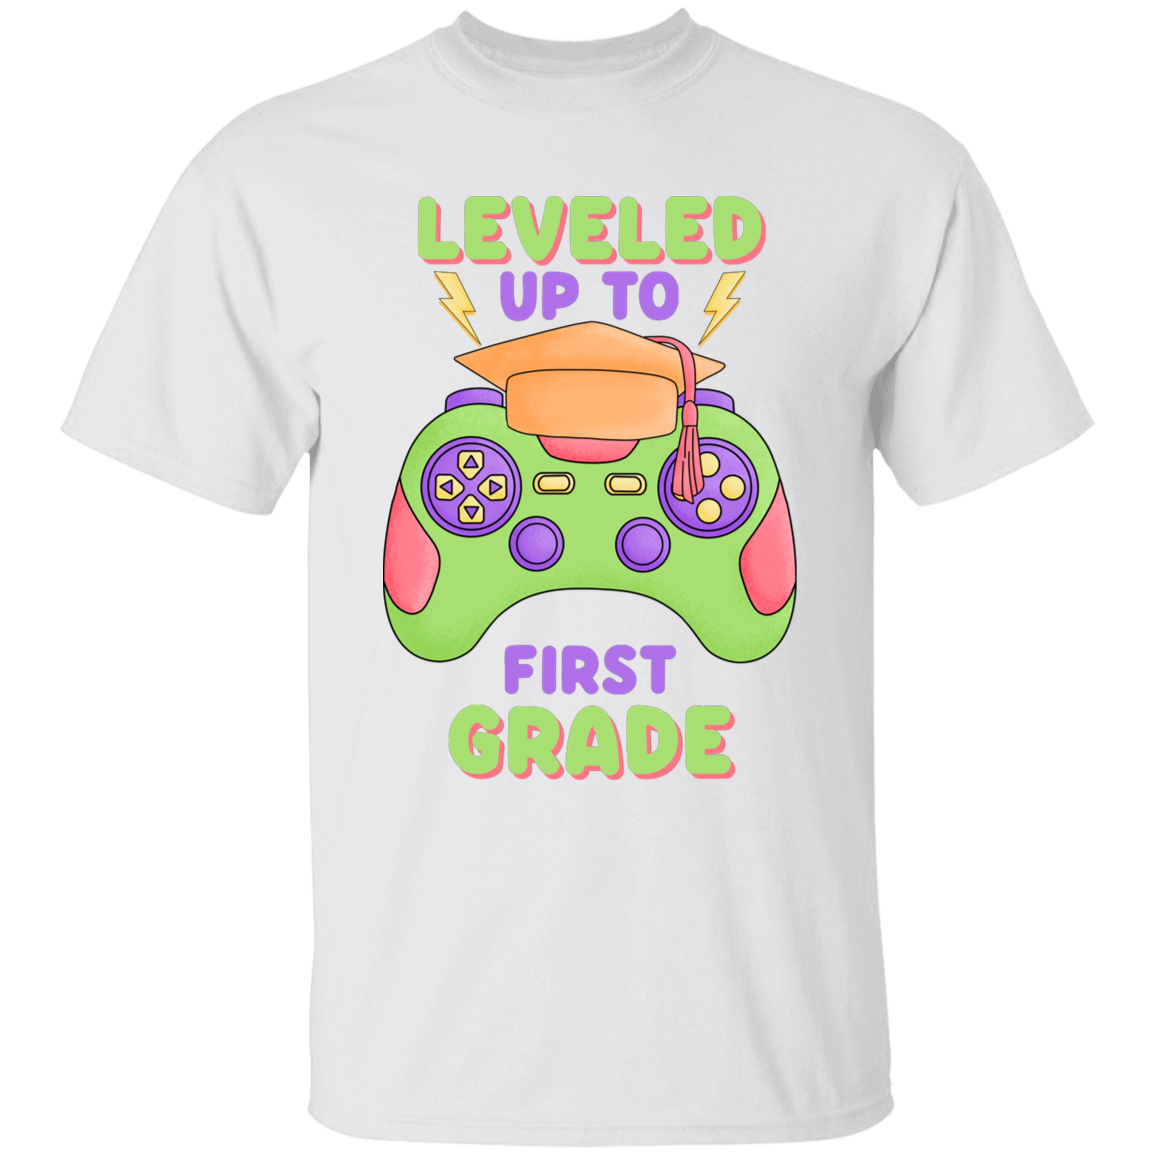 Leveled Up To First Grade Youth Cotton T-Shirt